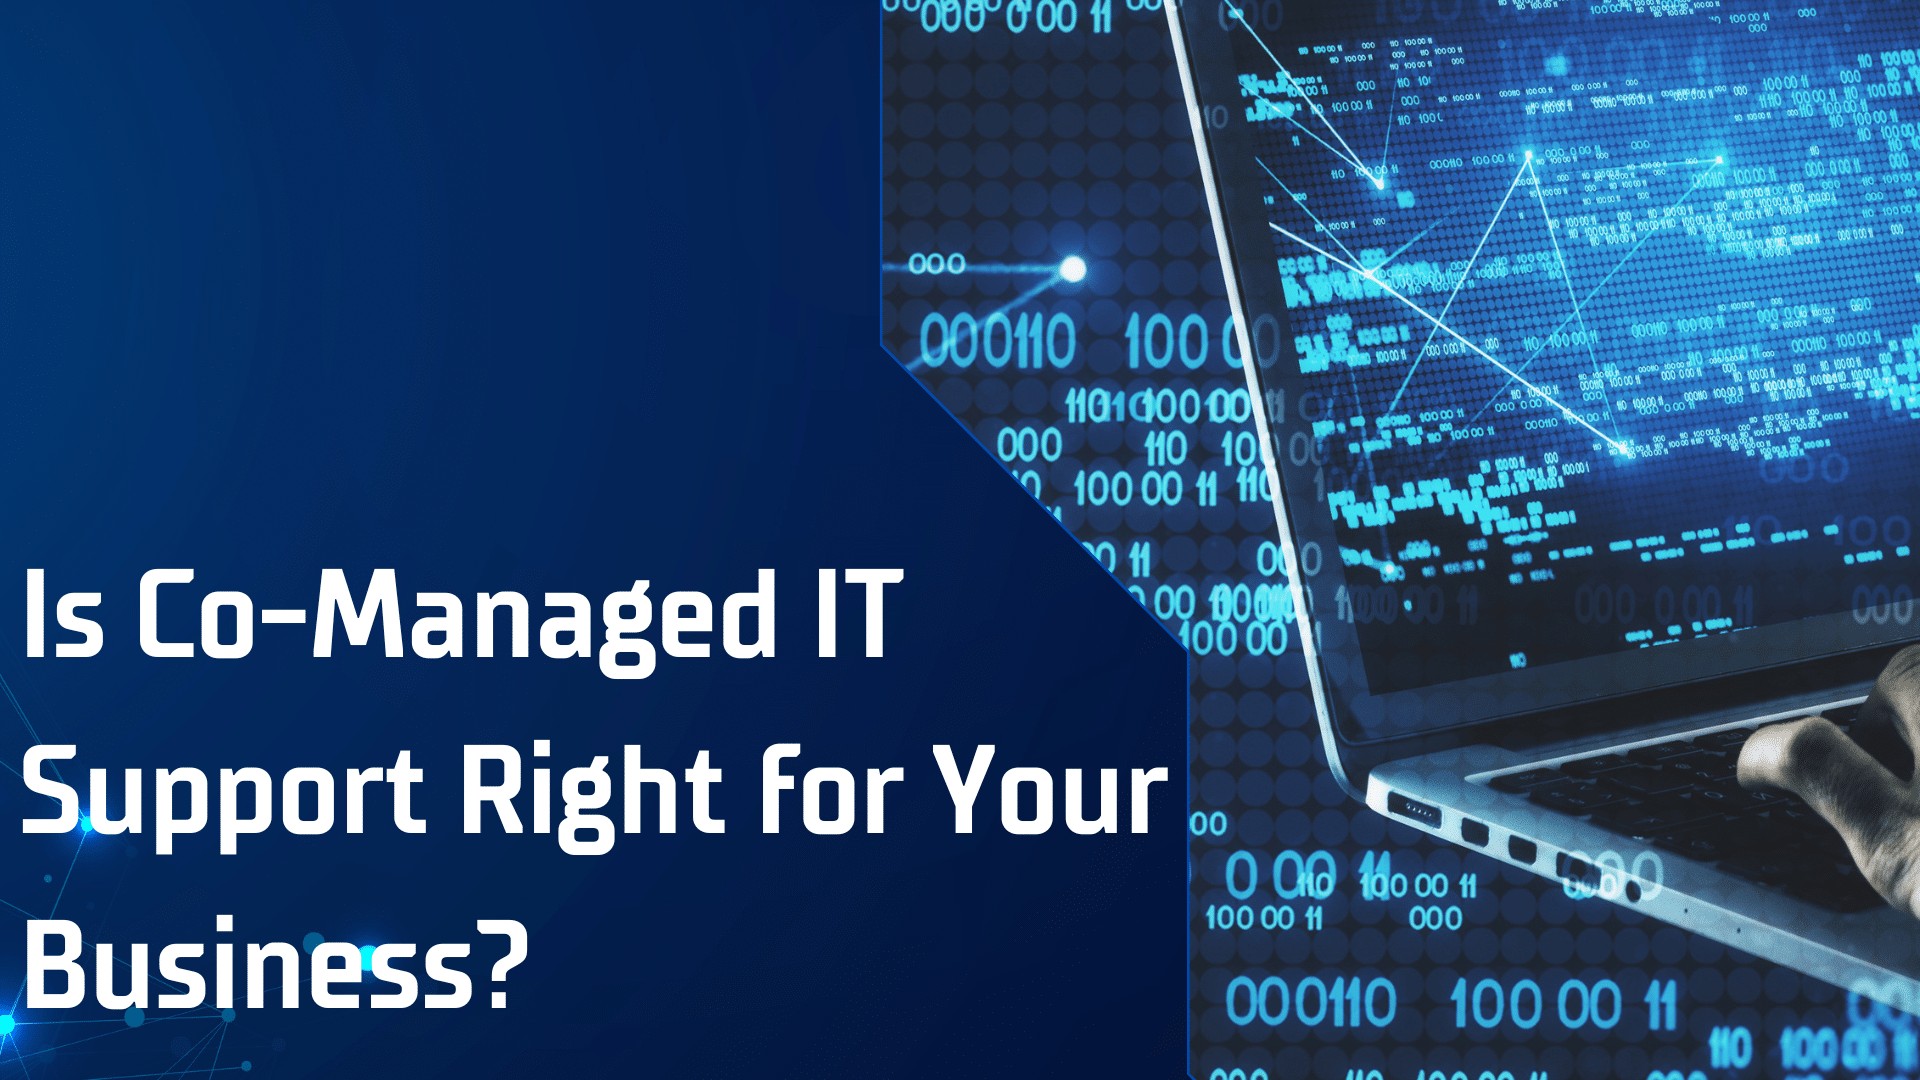 Is Co-Managed IT Support Right for Your Business